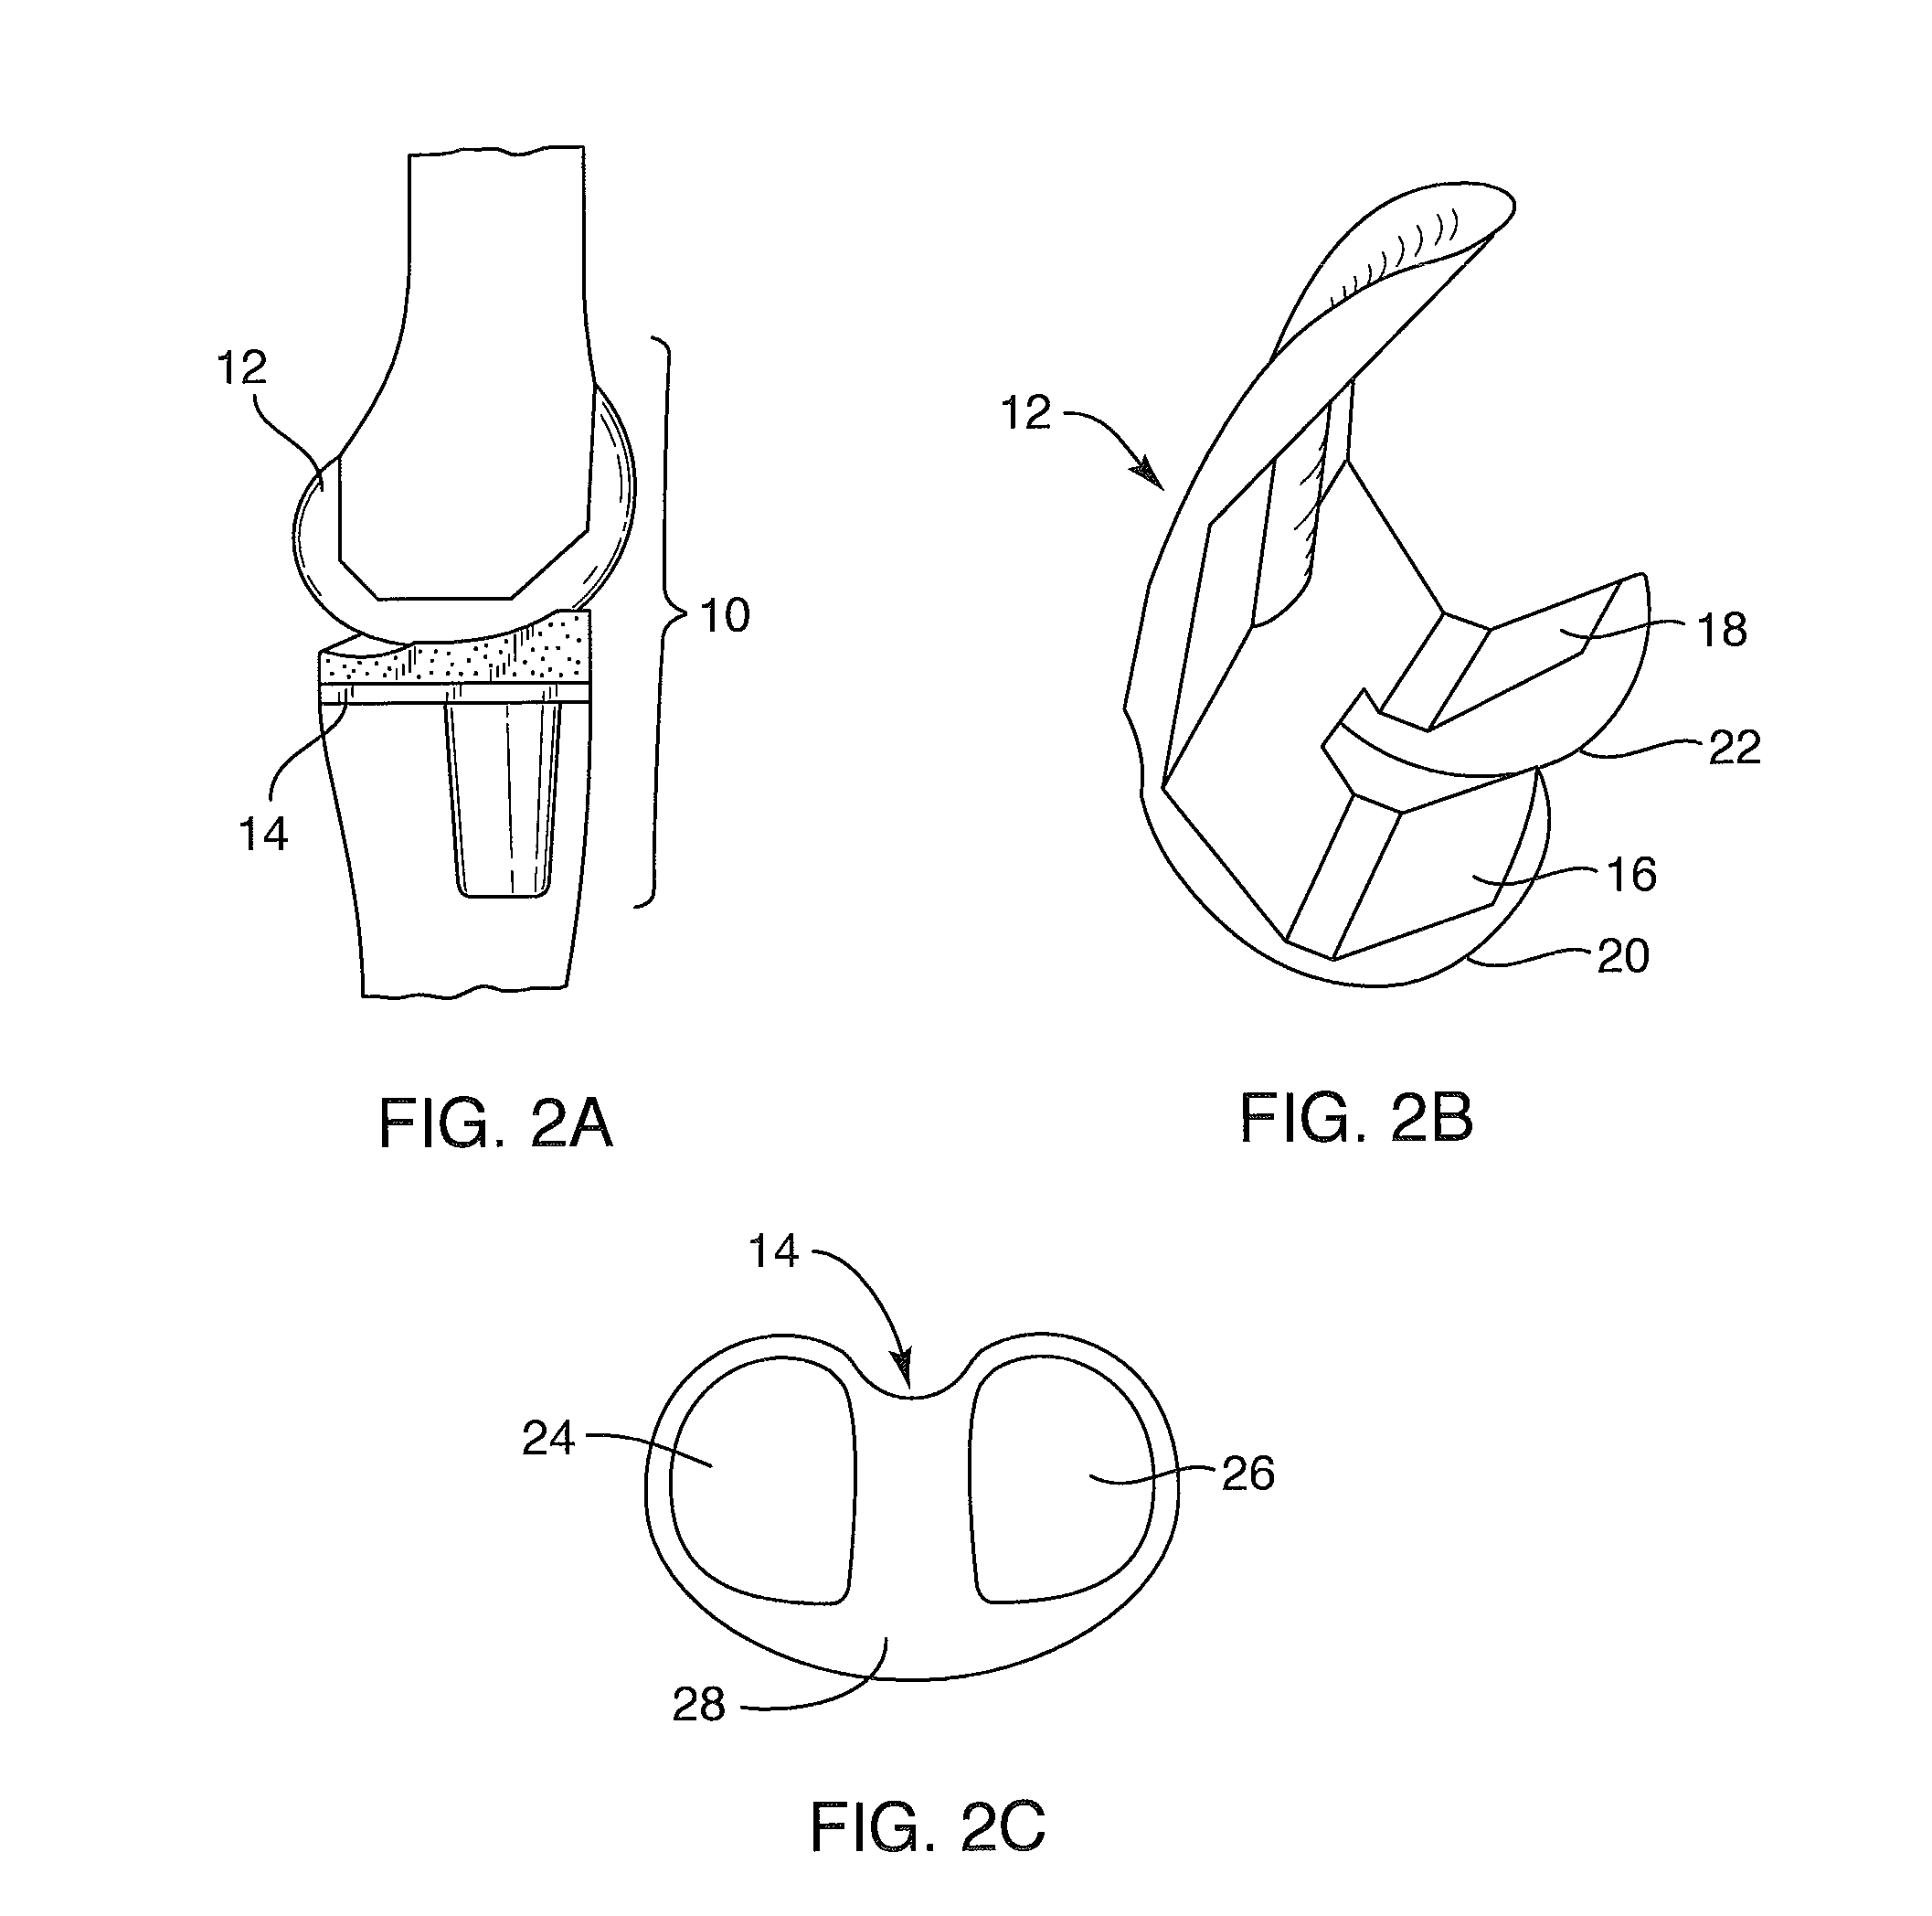 Systems and methods for providing a modular femoral component